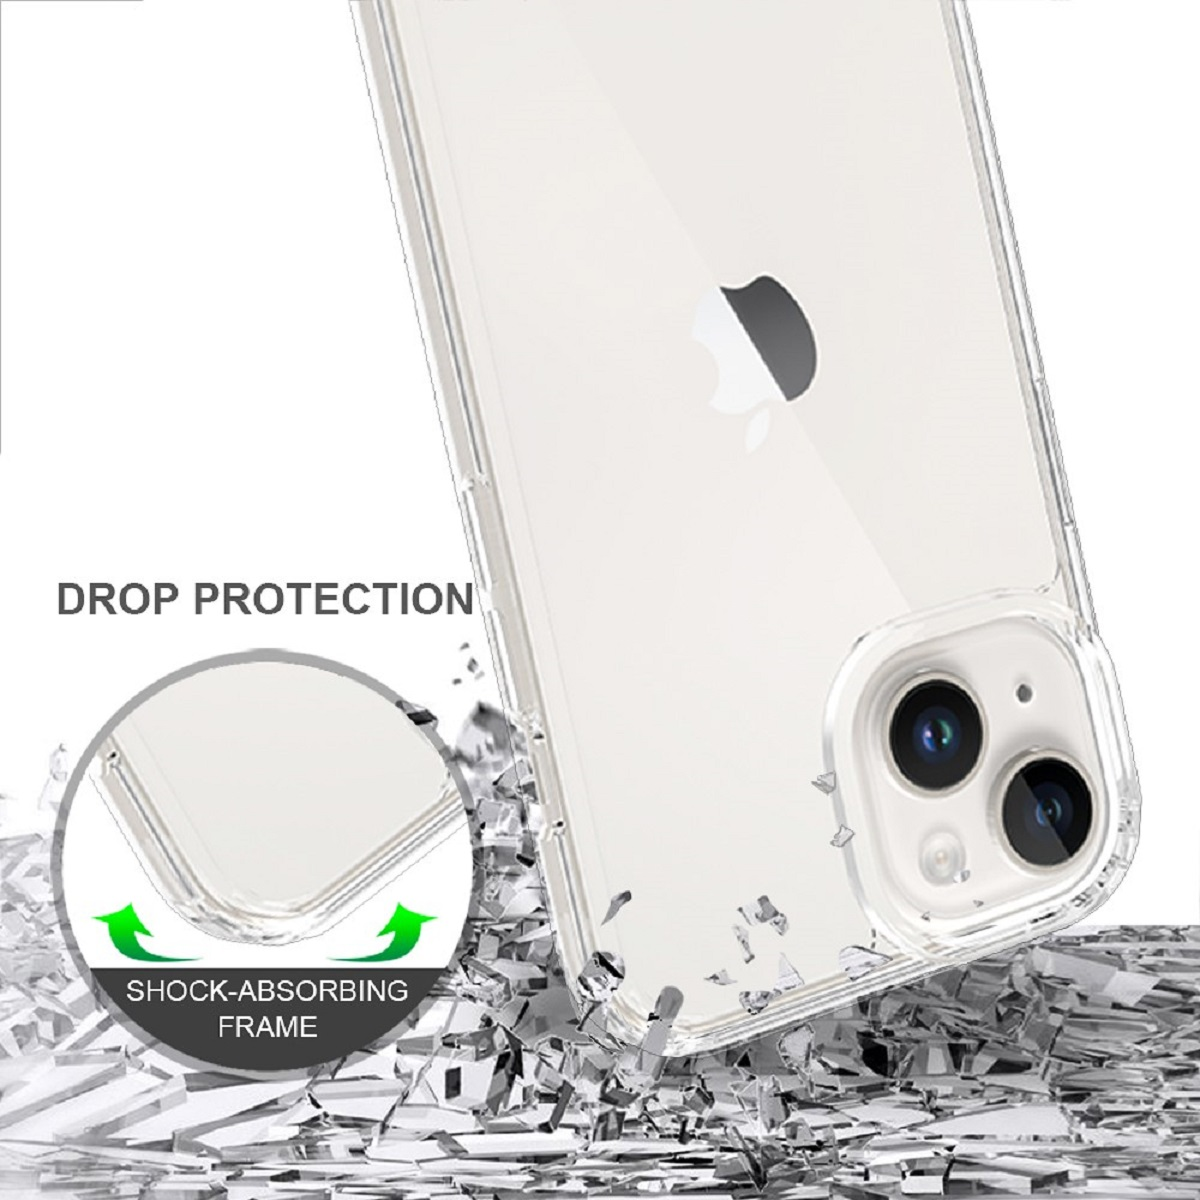 Pankow BERLIN iPhone JT Clear, 15, Apple, transparent Backcover,